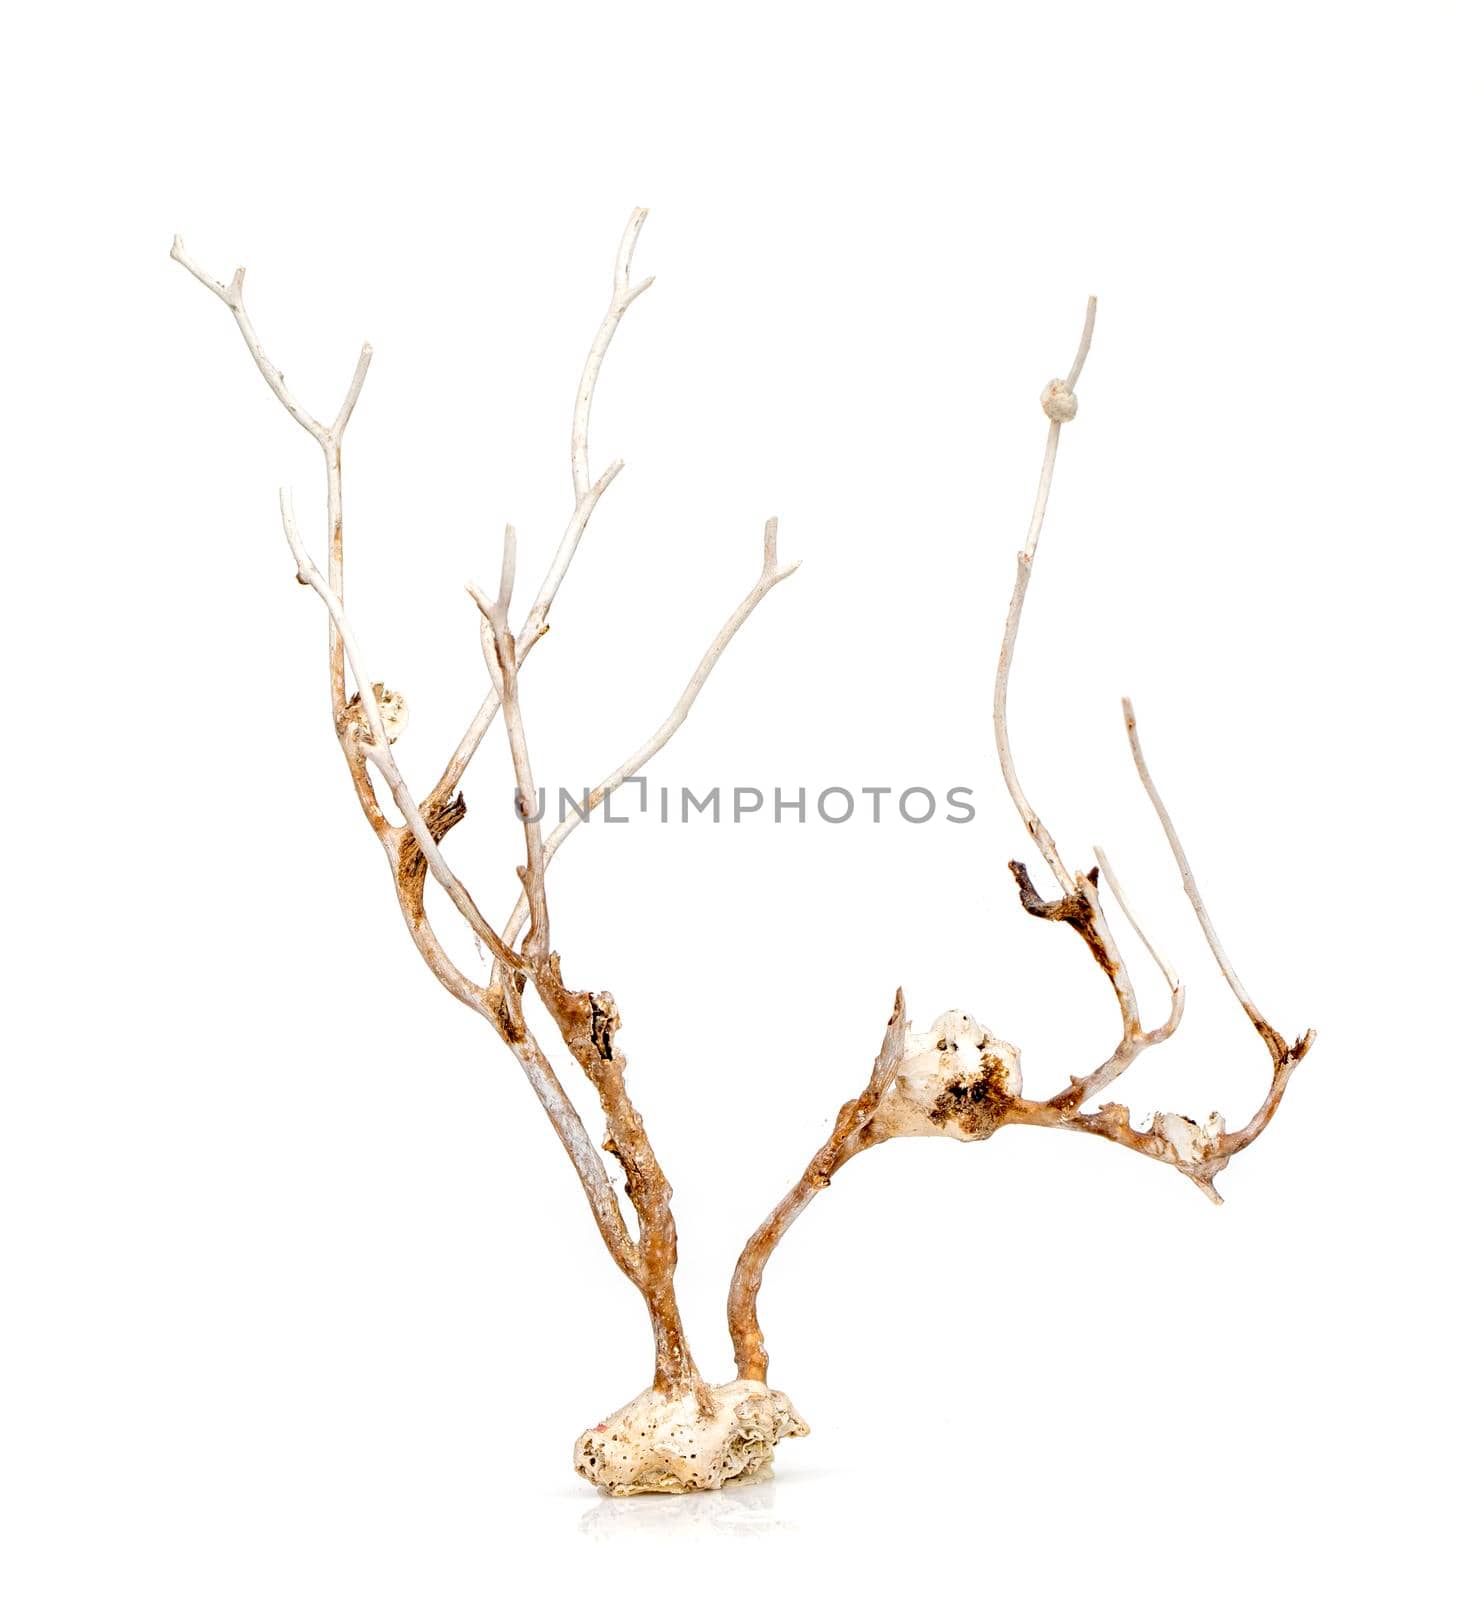 Image of dry natural coral or coralline isolated on white background. by yod67